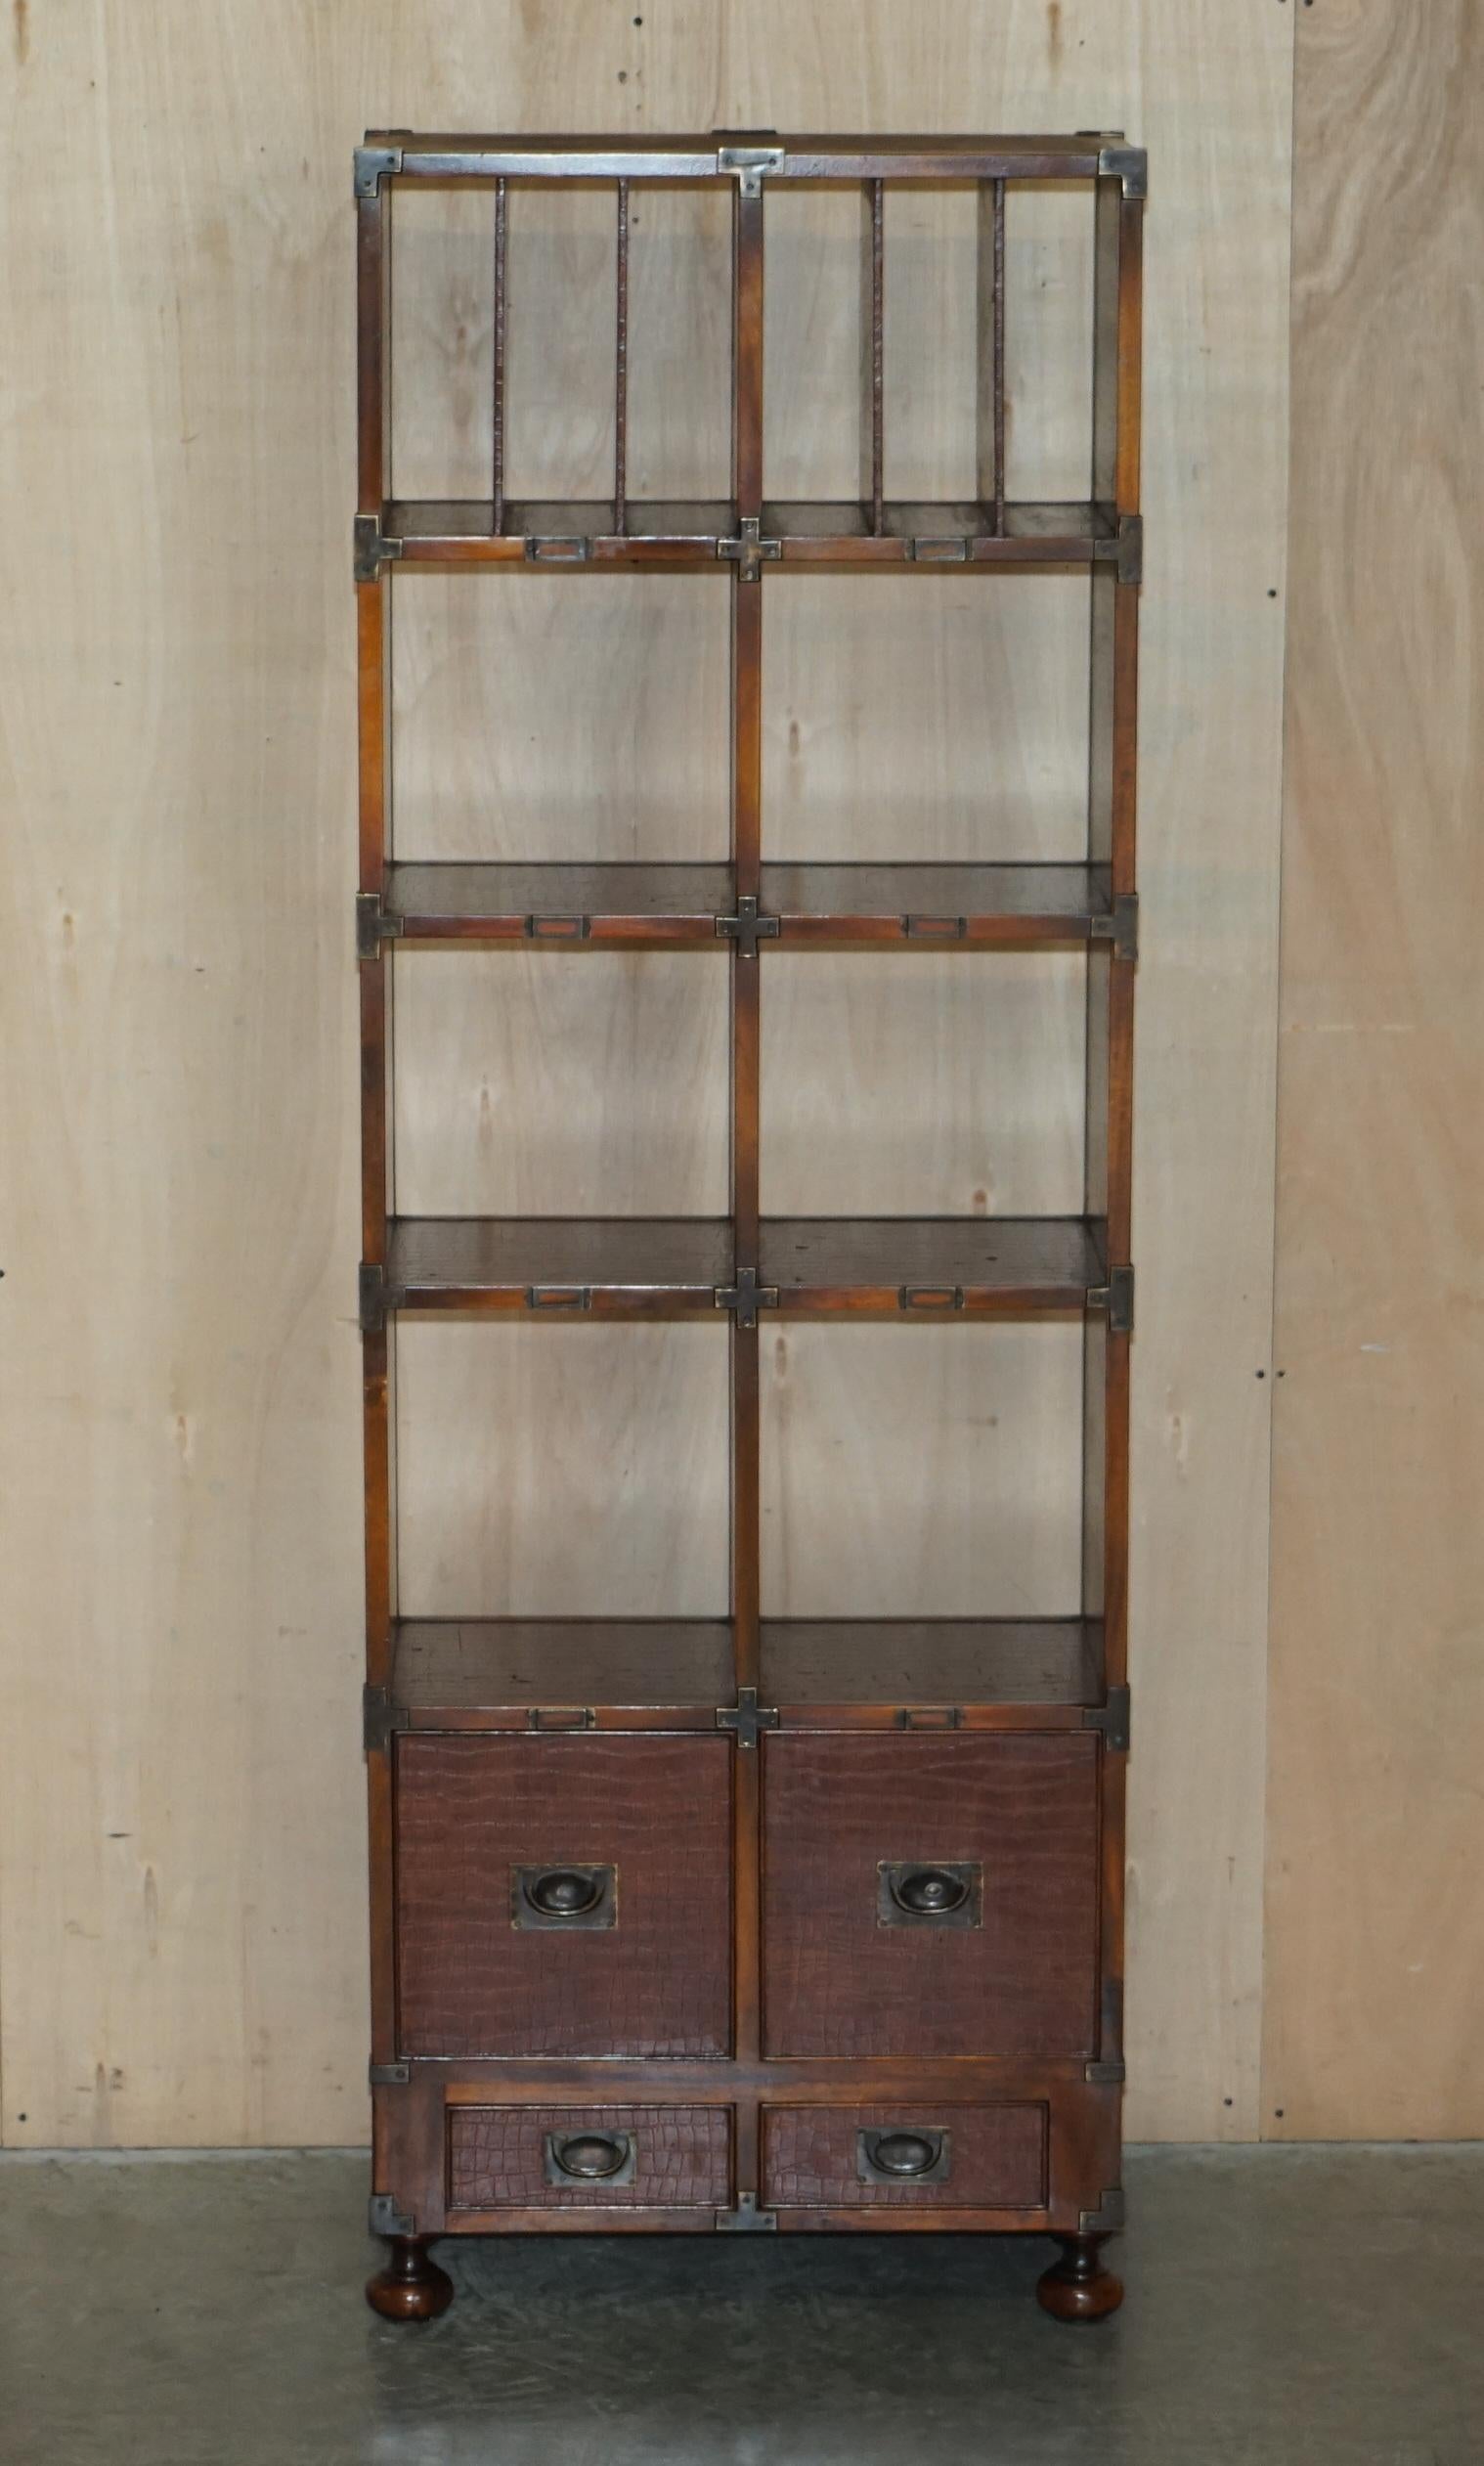 PAIR OF CROCODILE LEATHER Offene LiBRARY-BOOKCASES MIT DRAWERS & RECORD SLOTS im Angebot 8